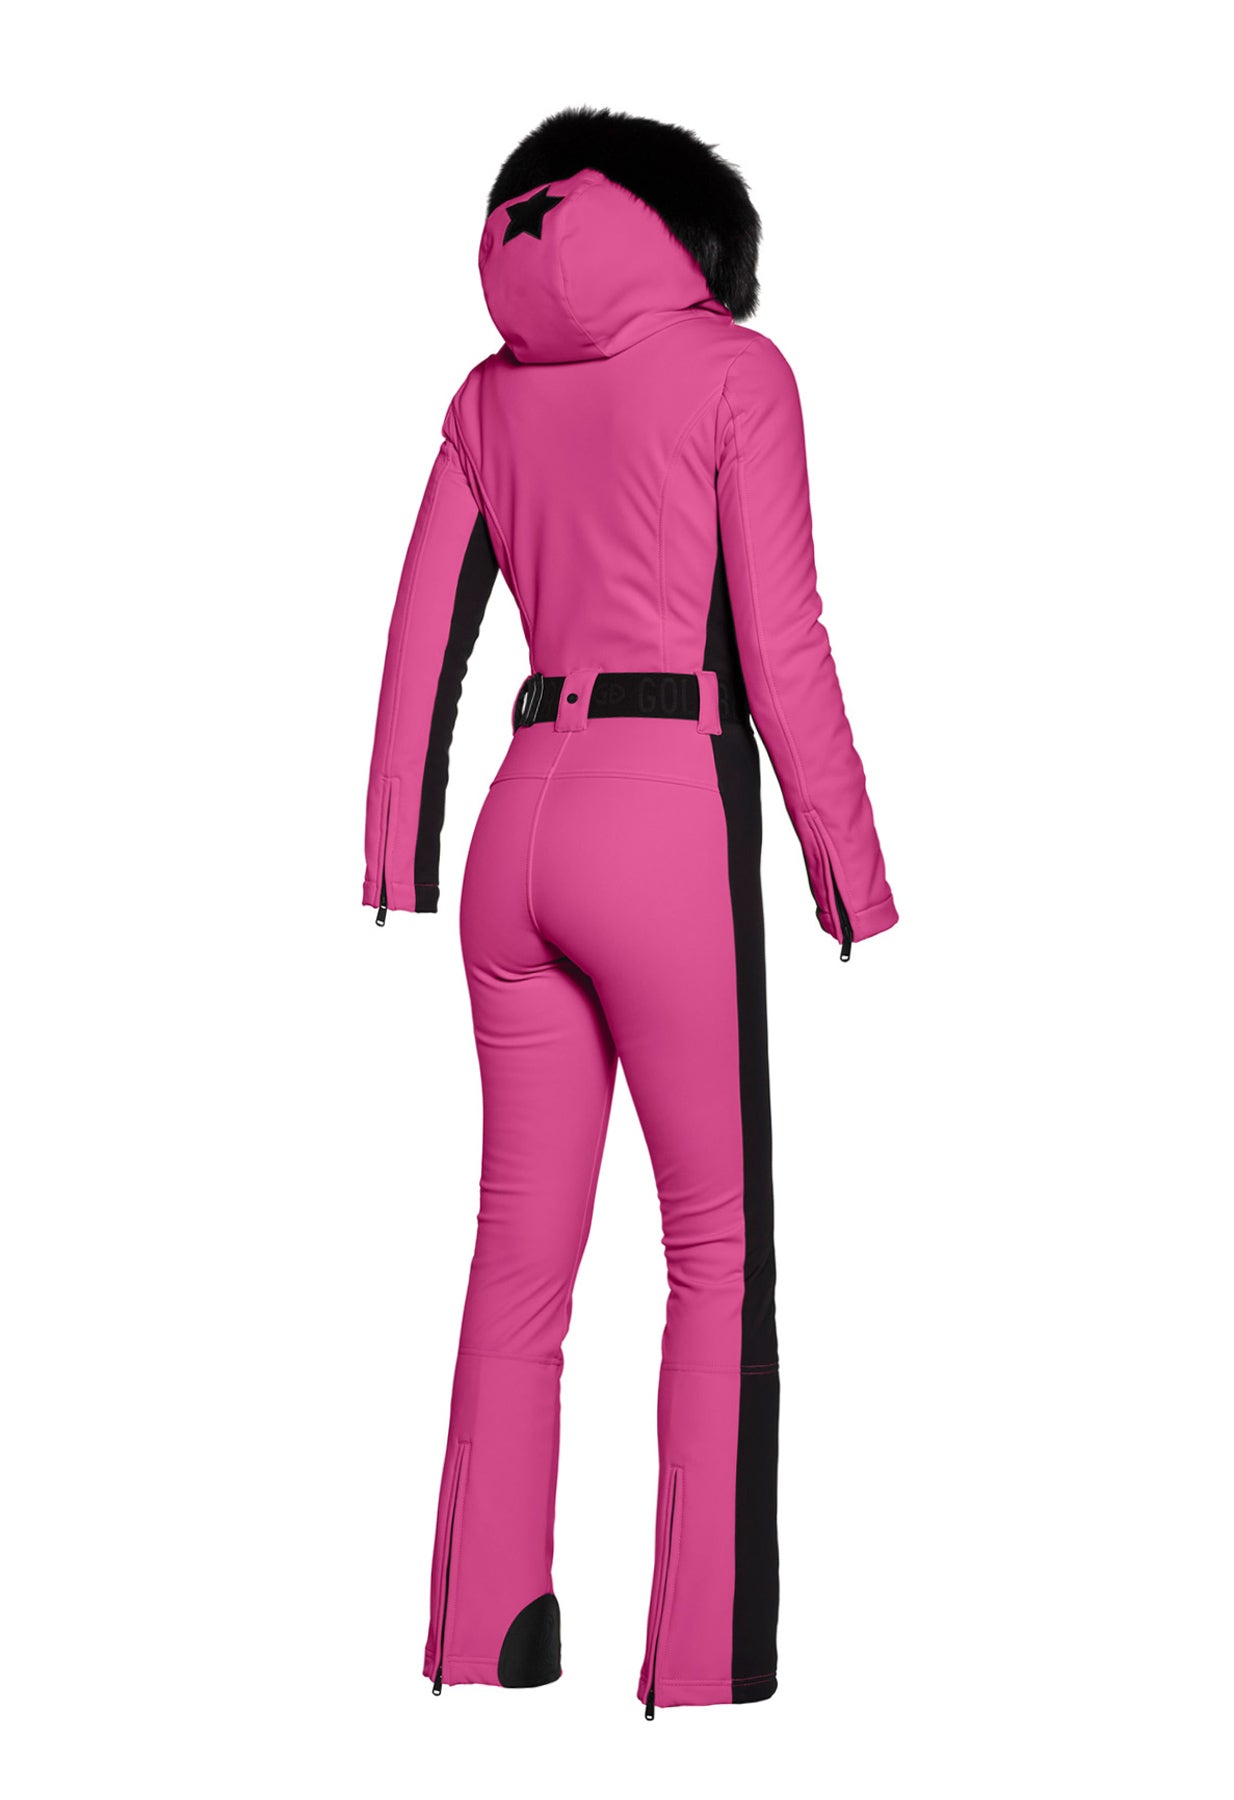 Goldbergh Parry One Piece Longer Length Ski Suit in Pink with Faux Fur Hood